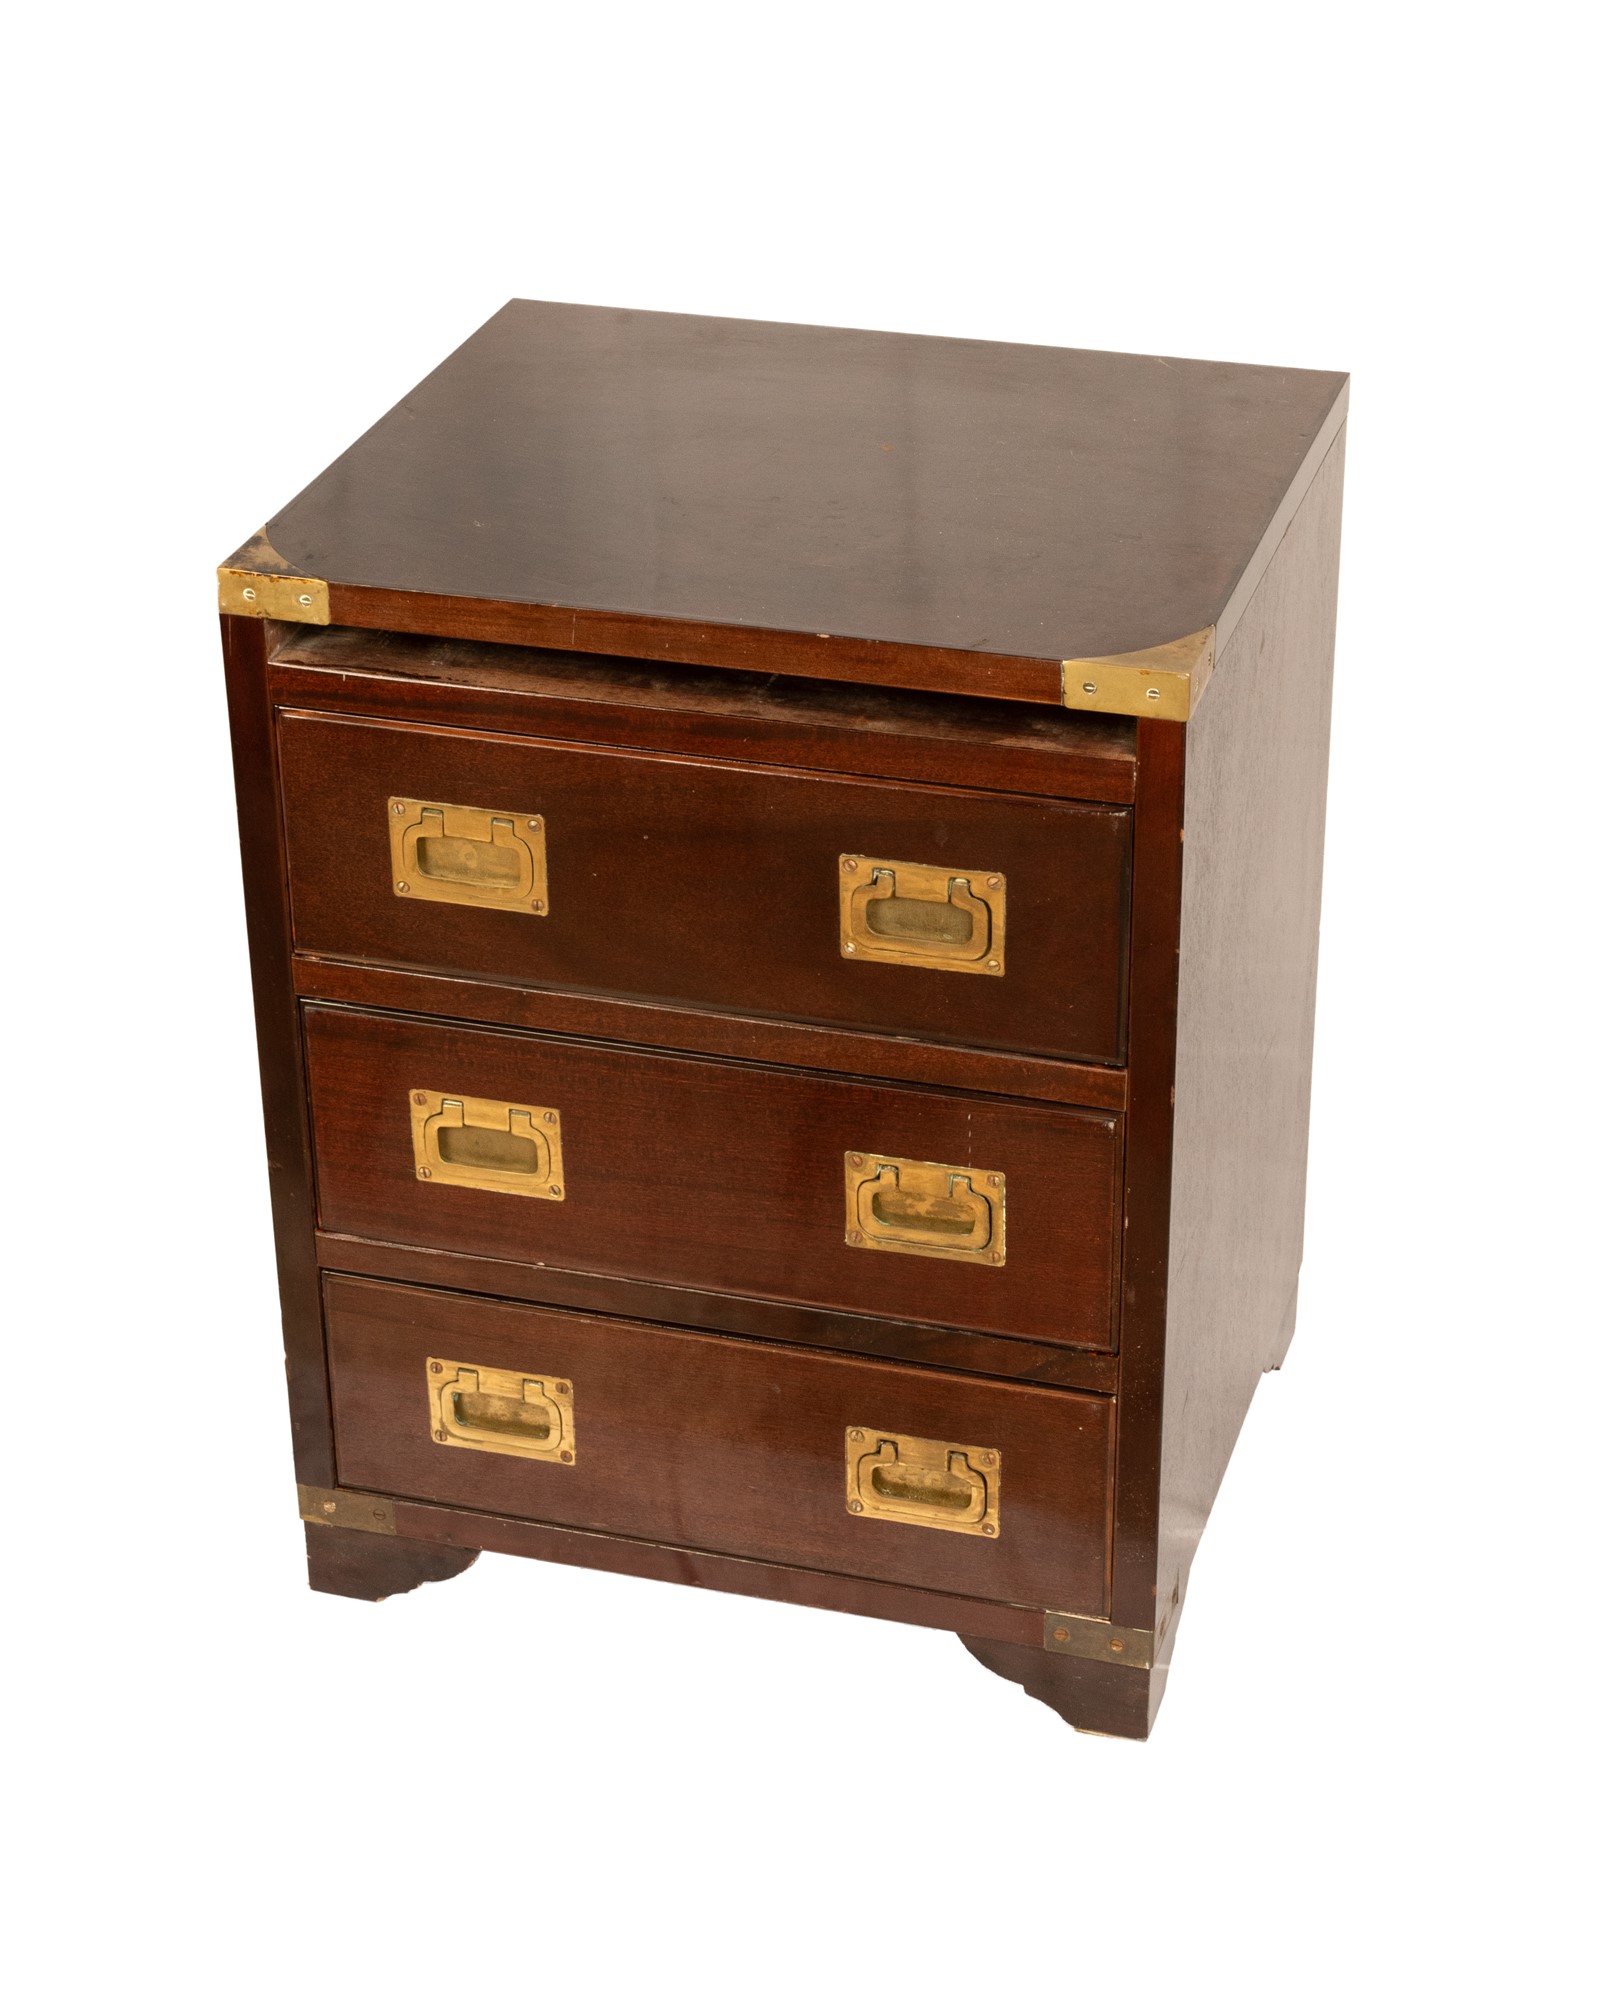 Antica Marina wooden bedside table with brass inserts - Image 18 of 23